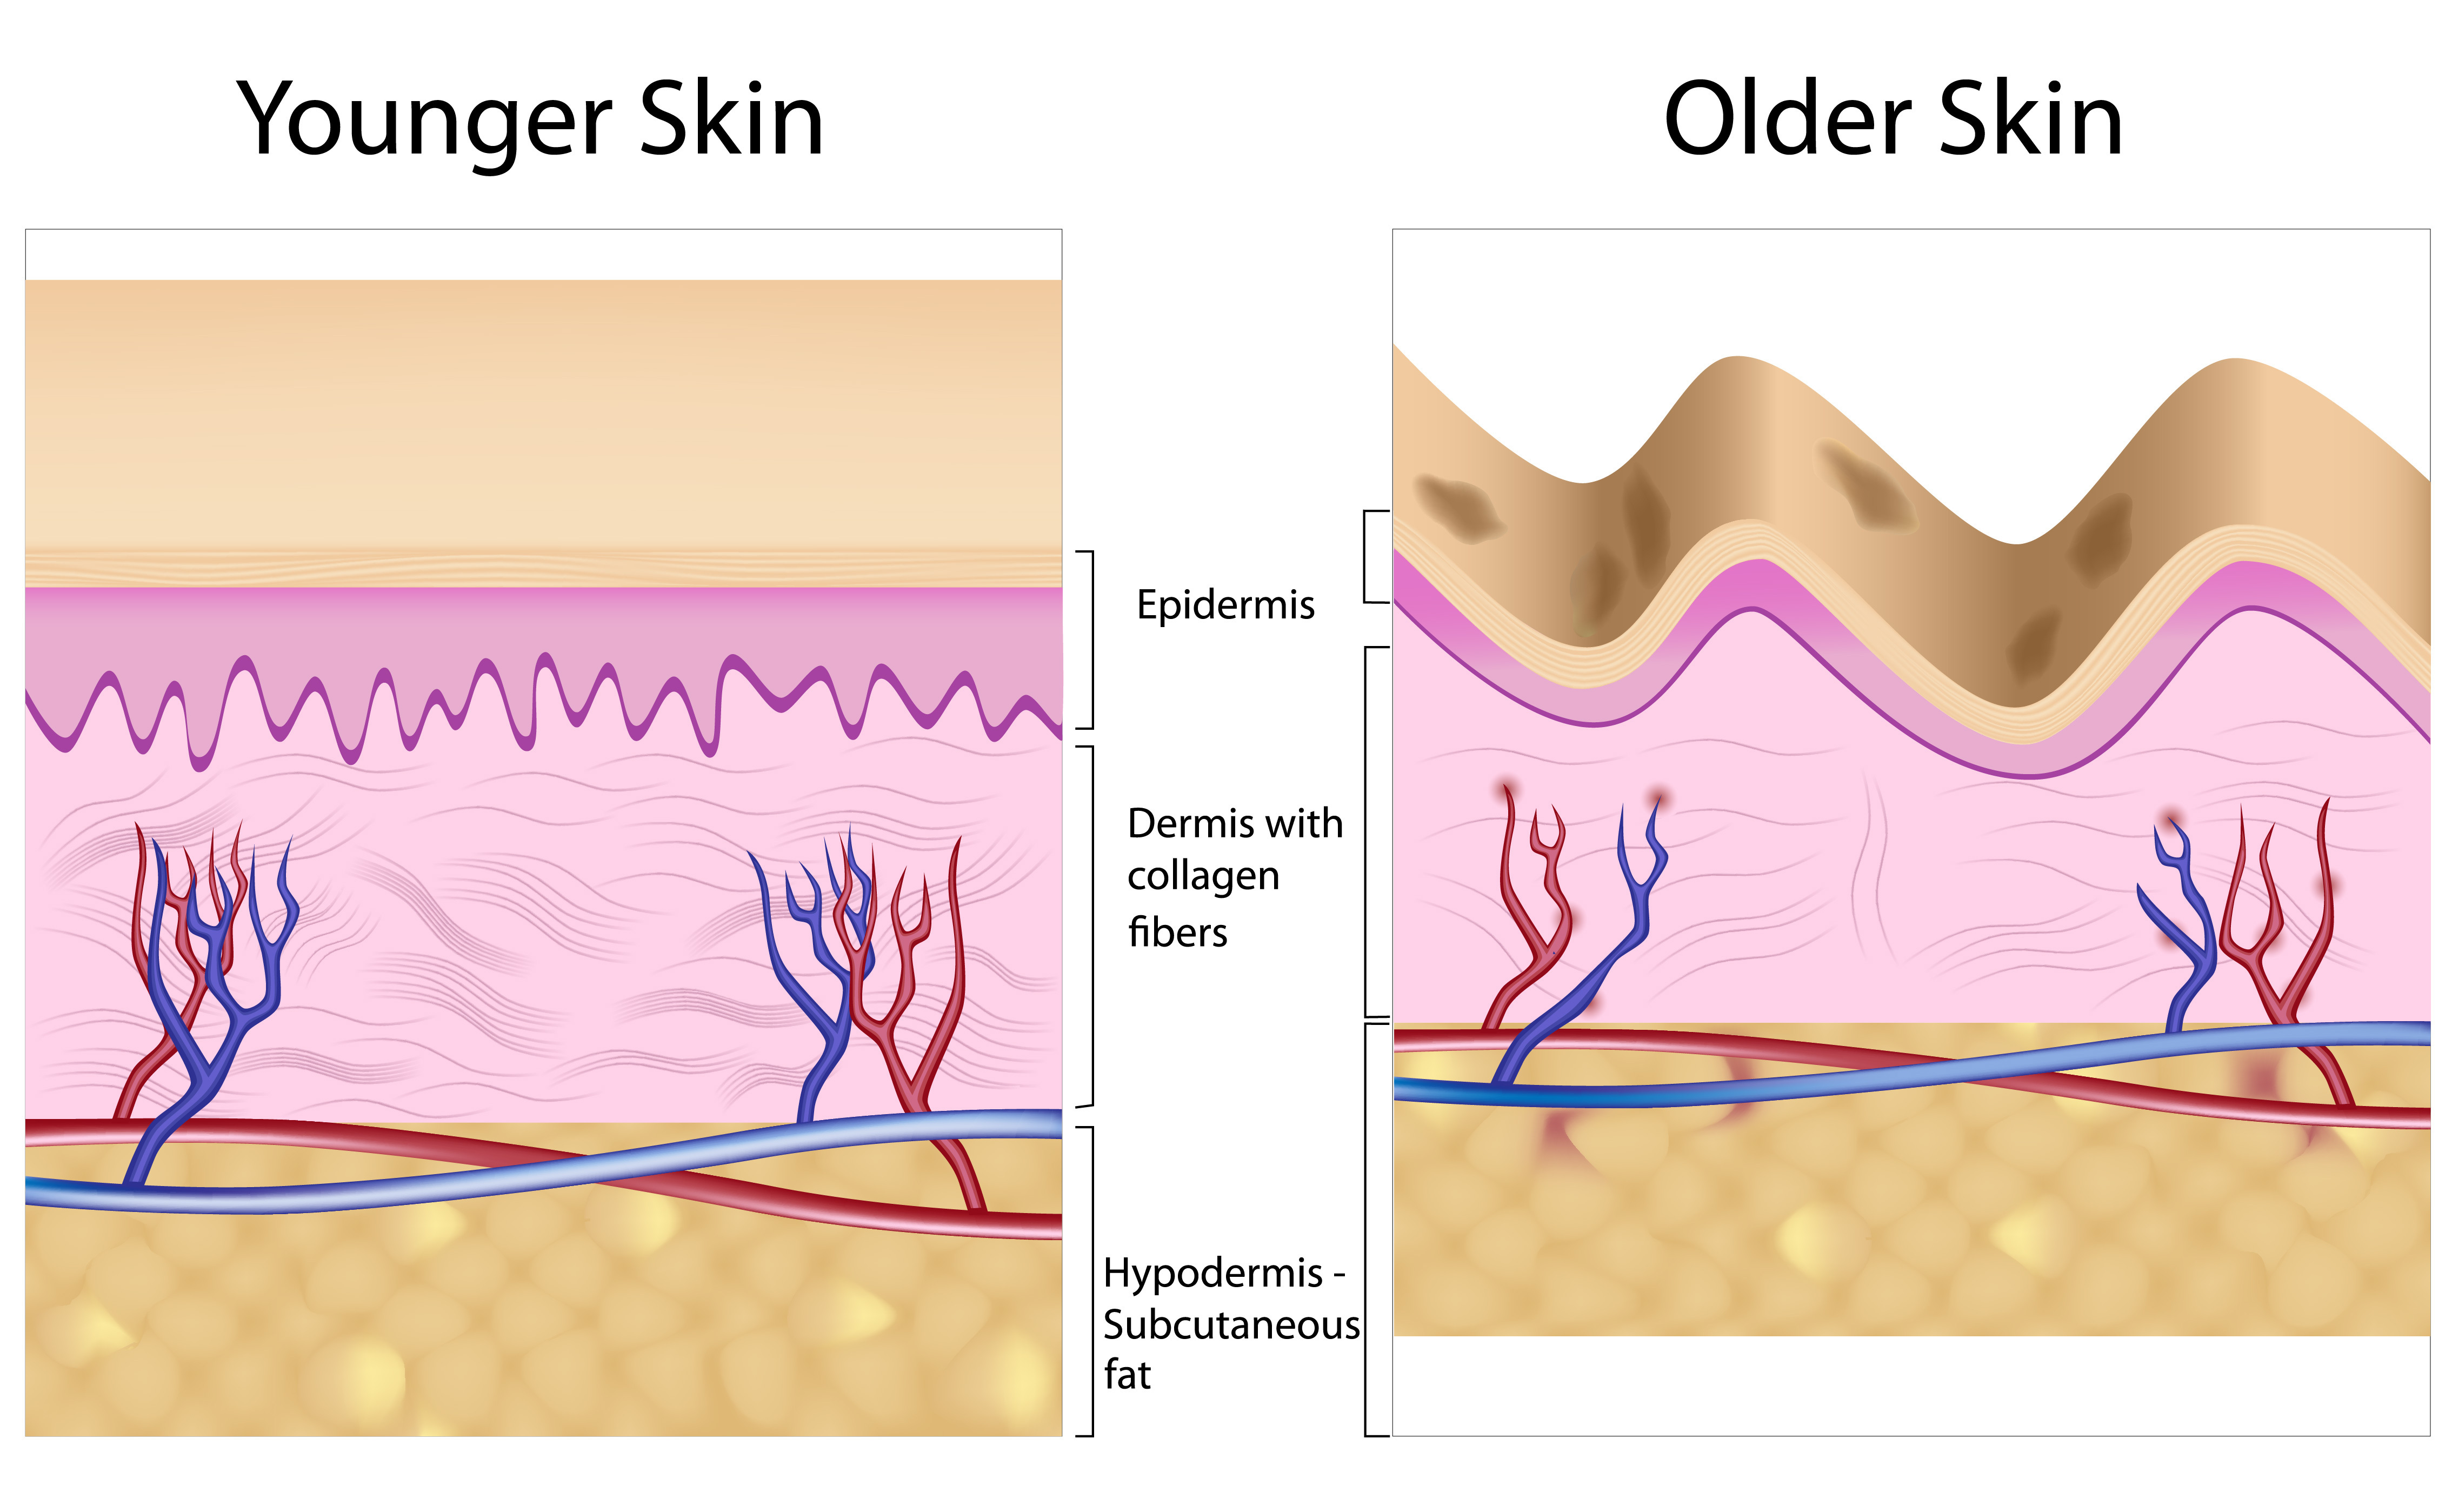 As people age, they lose the elasticity in their skin, causing it to sag.